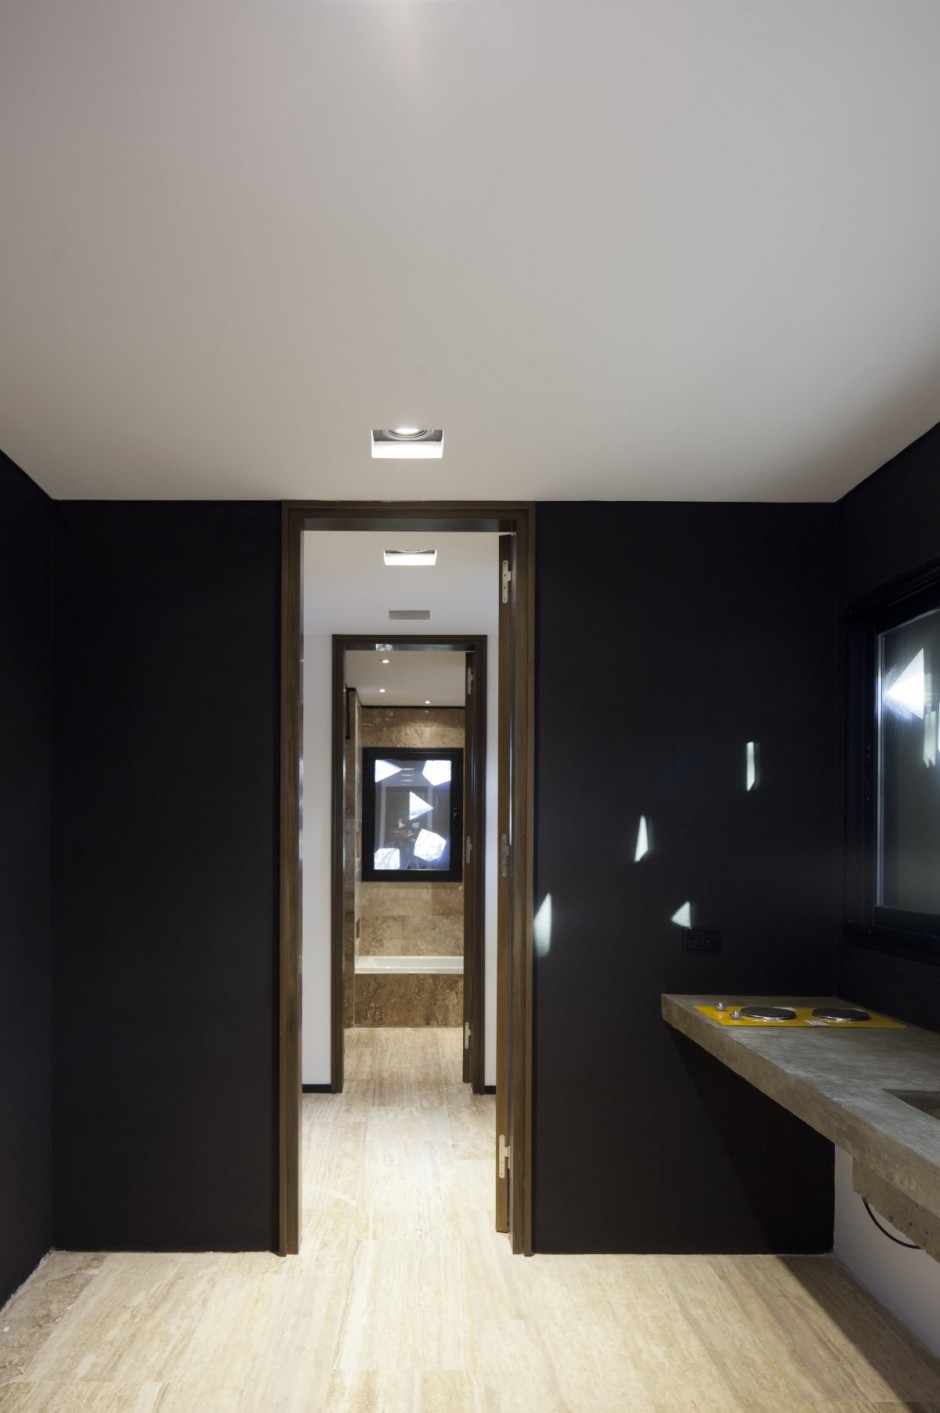 Restroom Design Blltt Enchanting Restroom Design Of Project BLLTT House With Soft Brown Wooden Floor And Black Colored Wall Decoration  Authentic Wall Decoration Of Minimalist Rectangular Mansion 